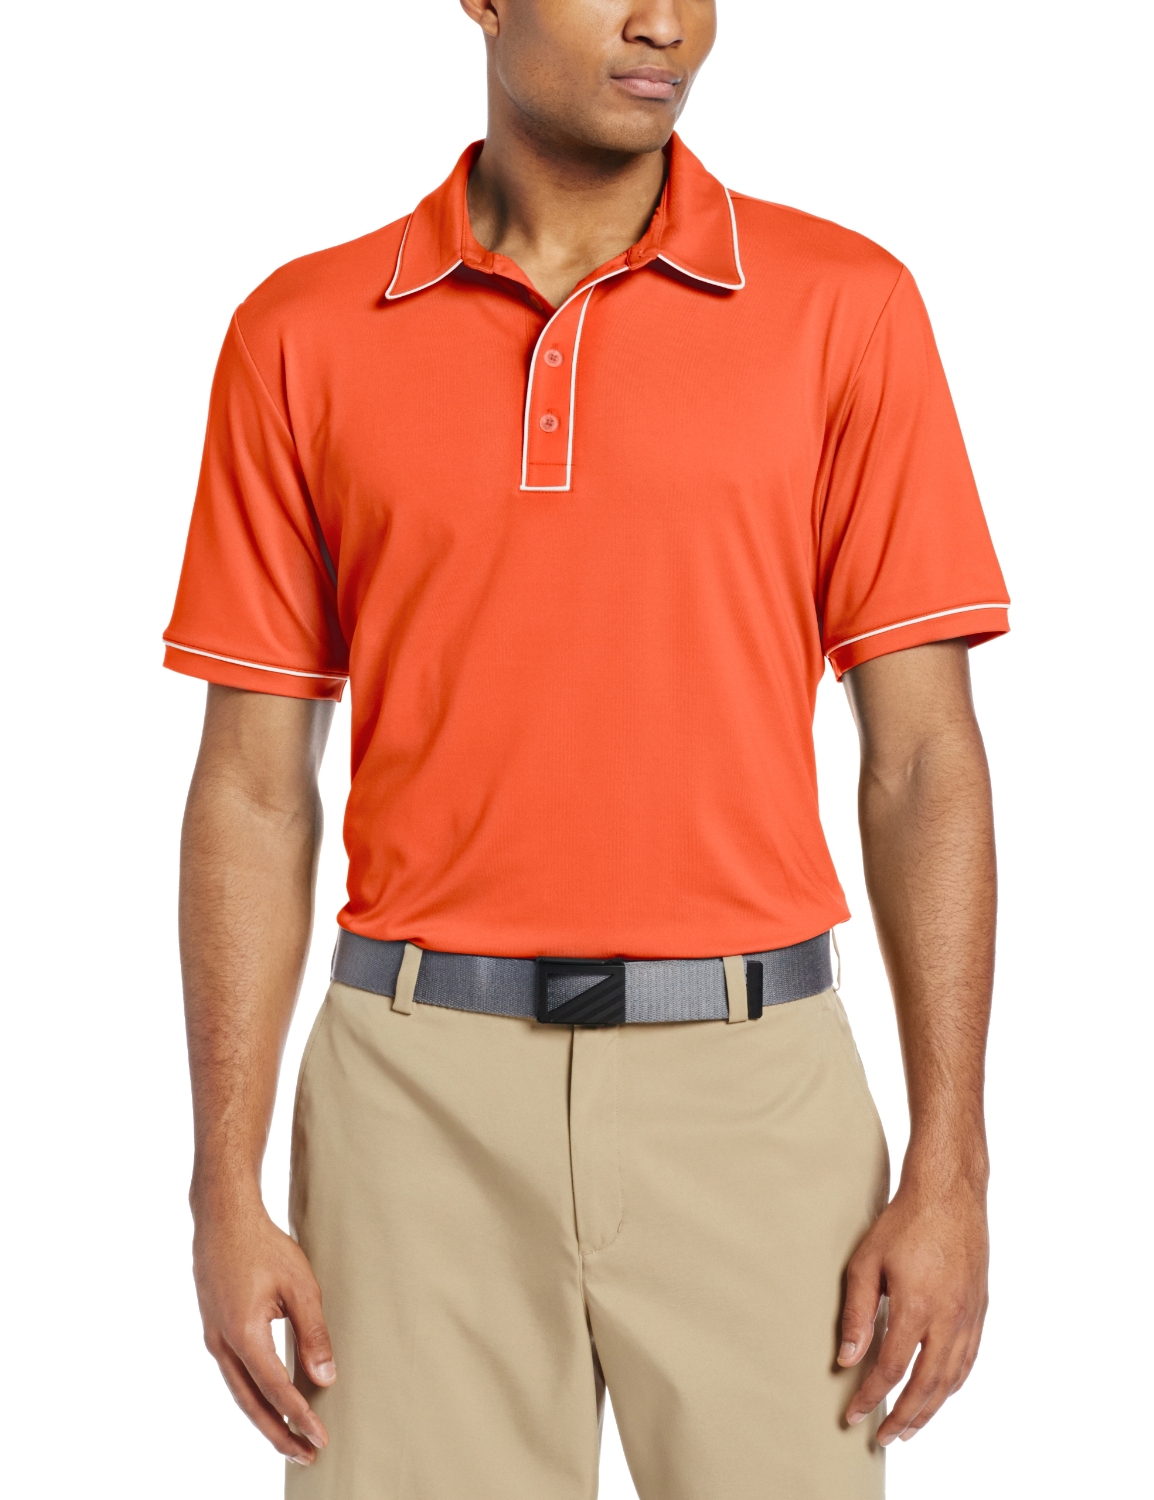 Mens Puremotion Piped Golf Polo Shirts